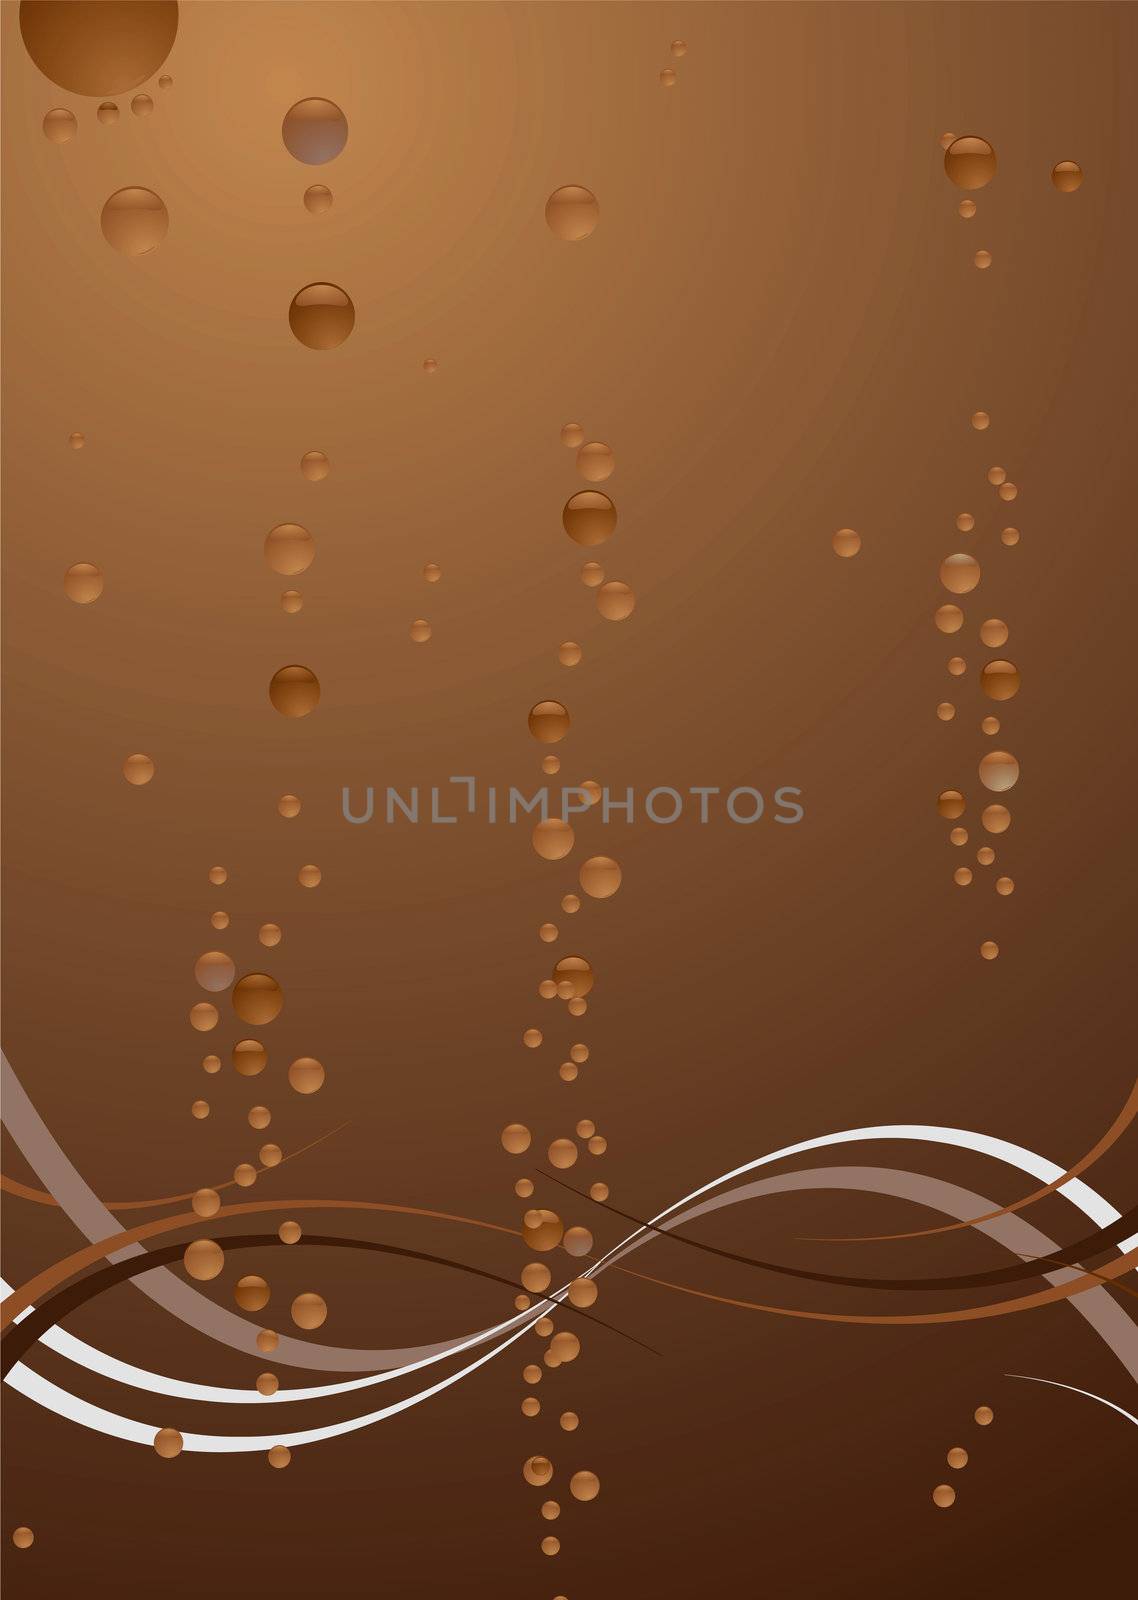 Abstract underwater background with floating bubbles in brown